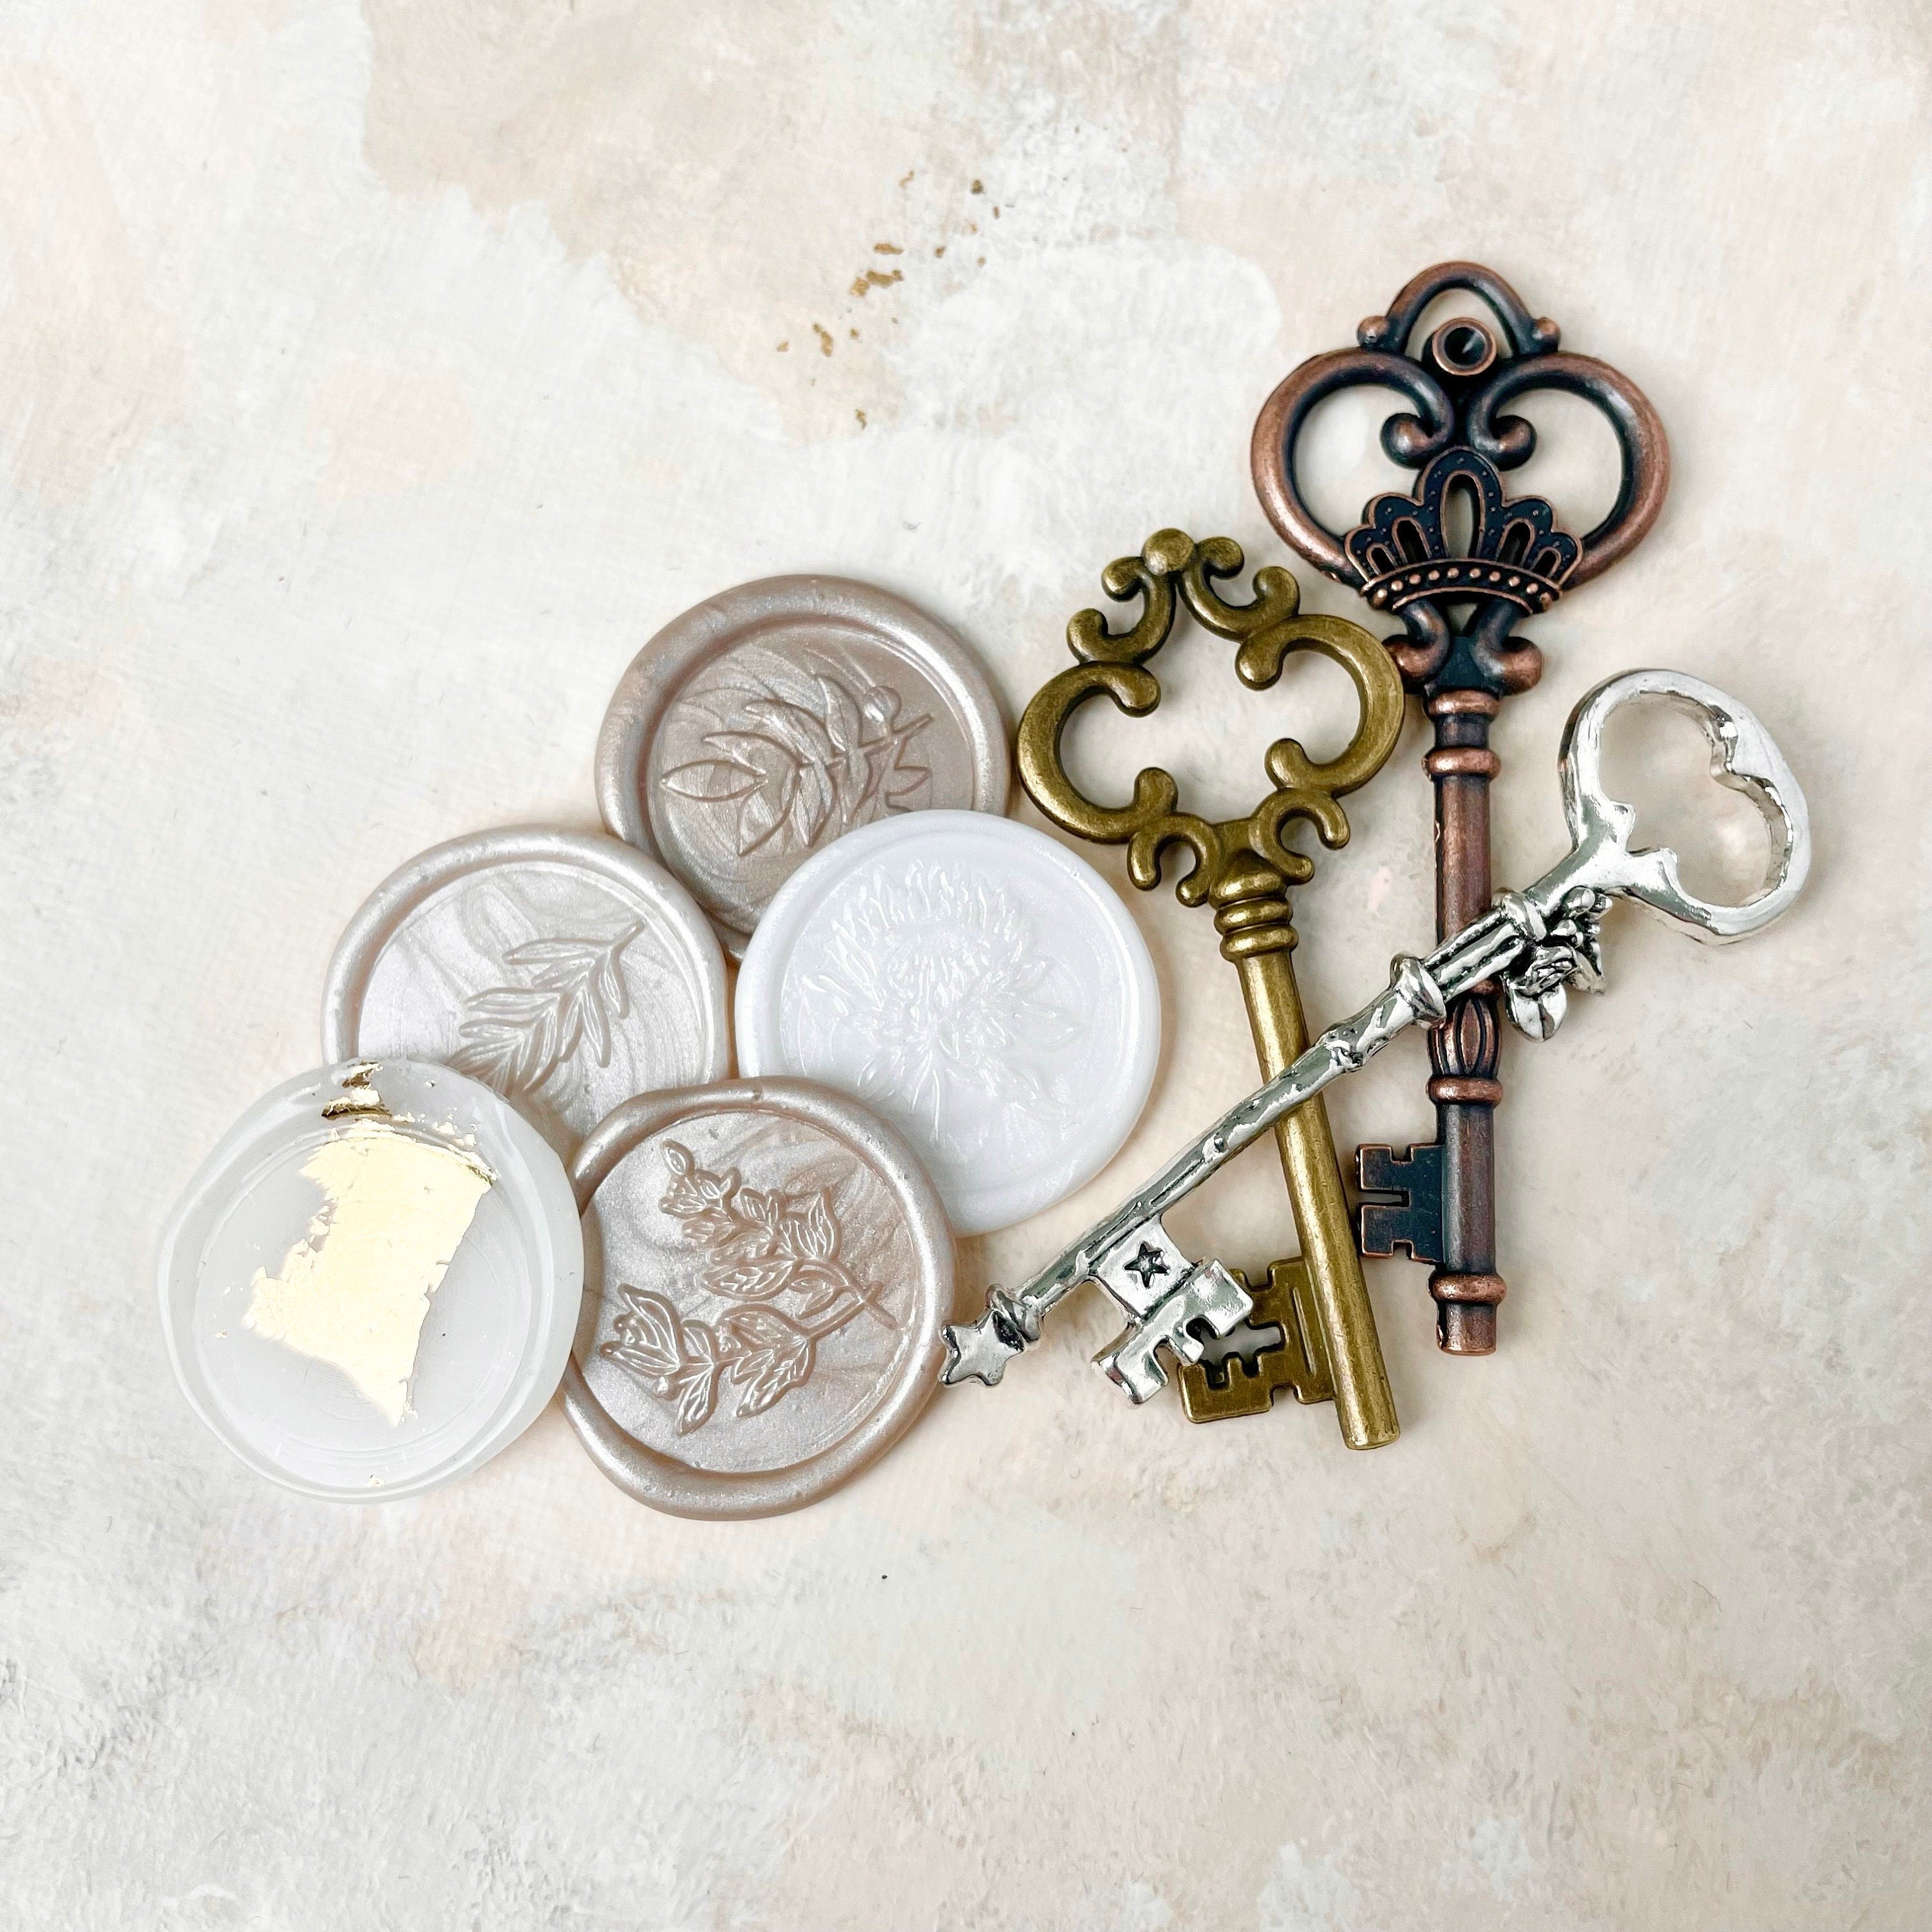 5 champagne and ivory wax seals beside one gold key, one bronze key, and one silver key these are must have flat lay props from Champagne & GRIT